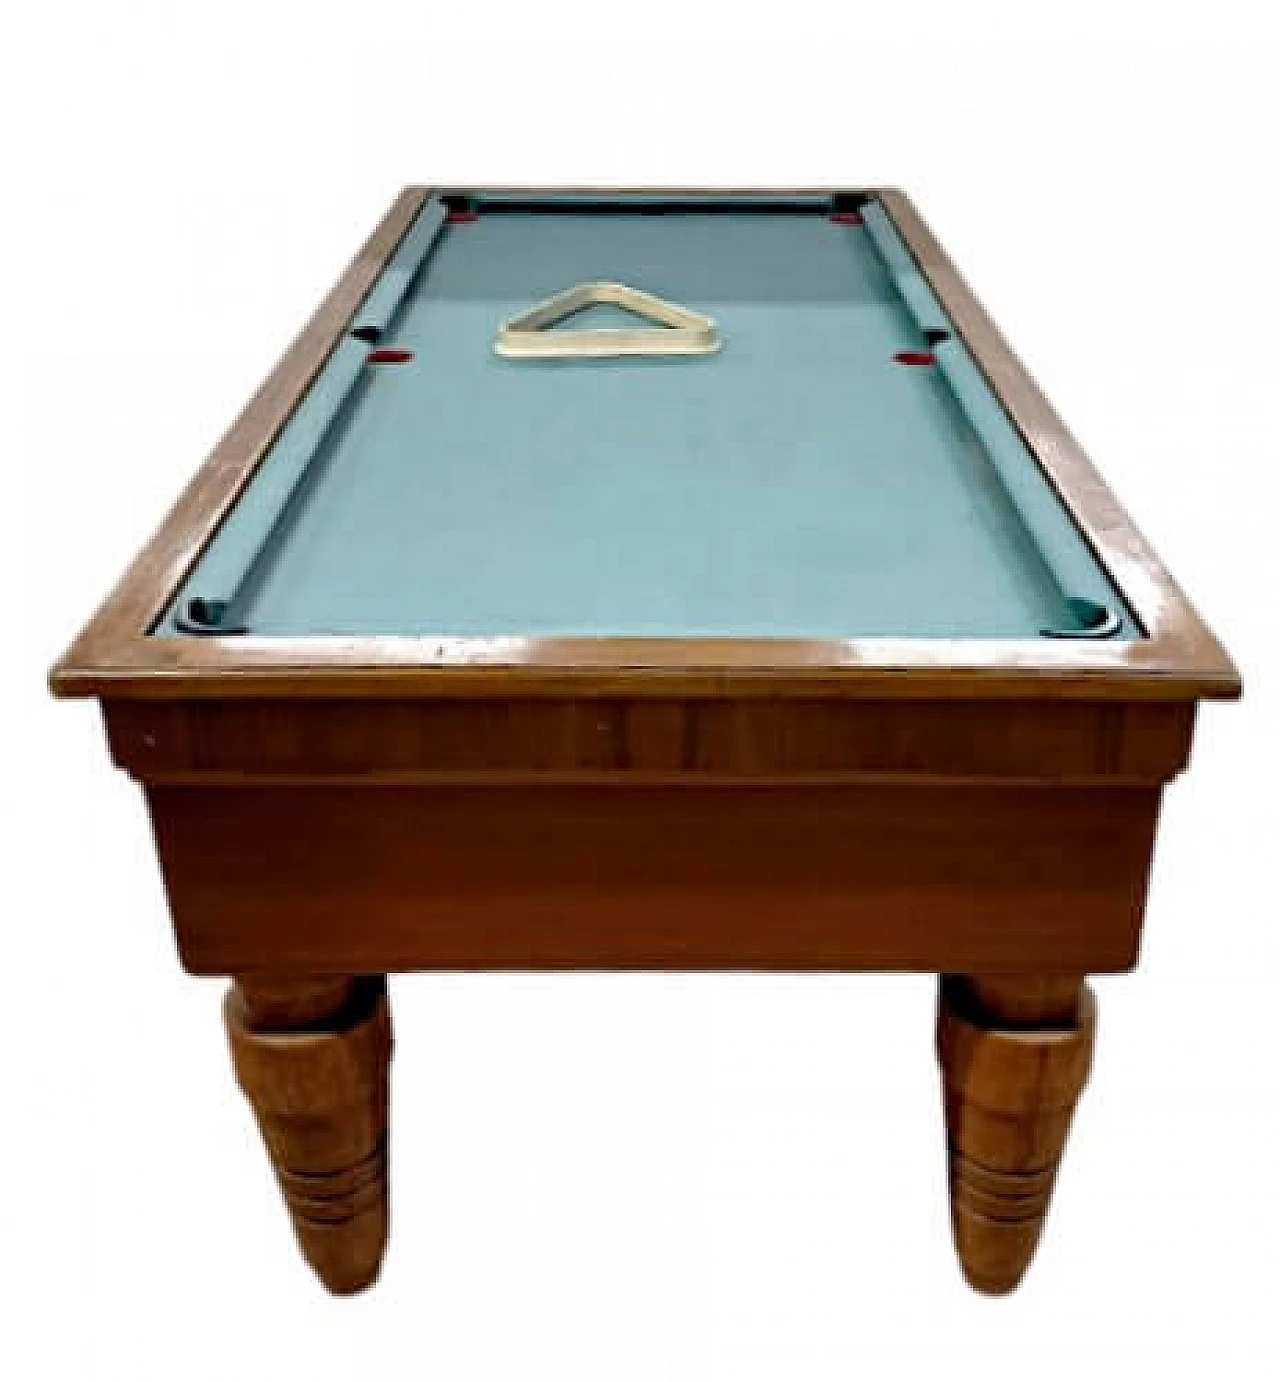 6-hole wooden pool table, 1960s 2